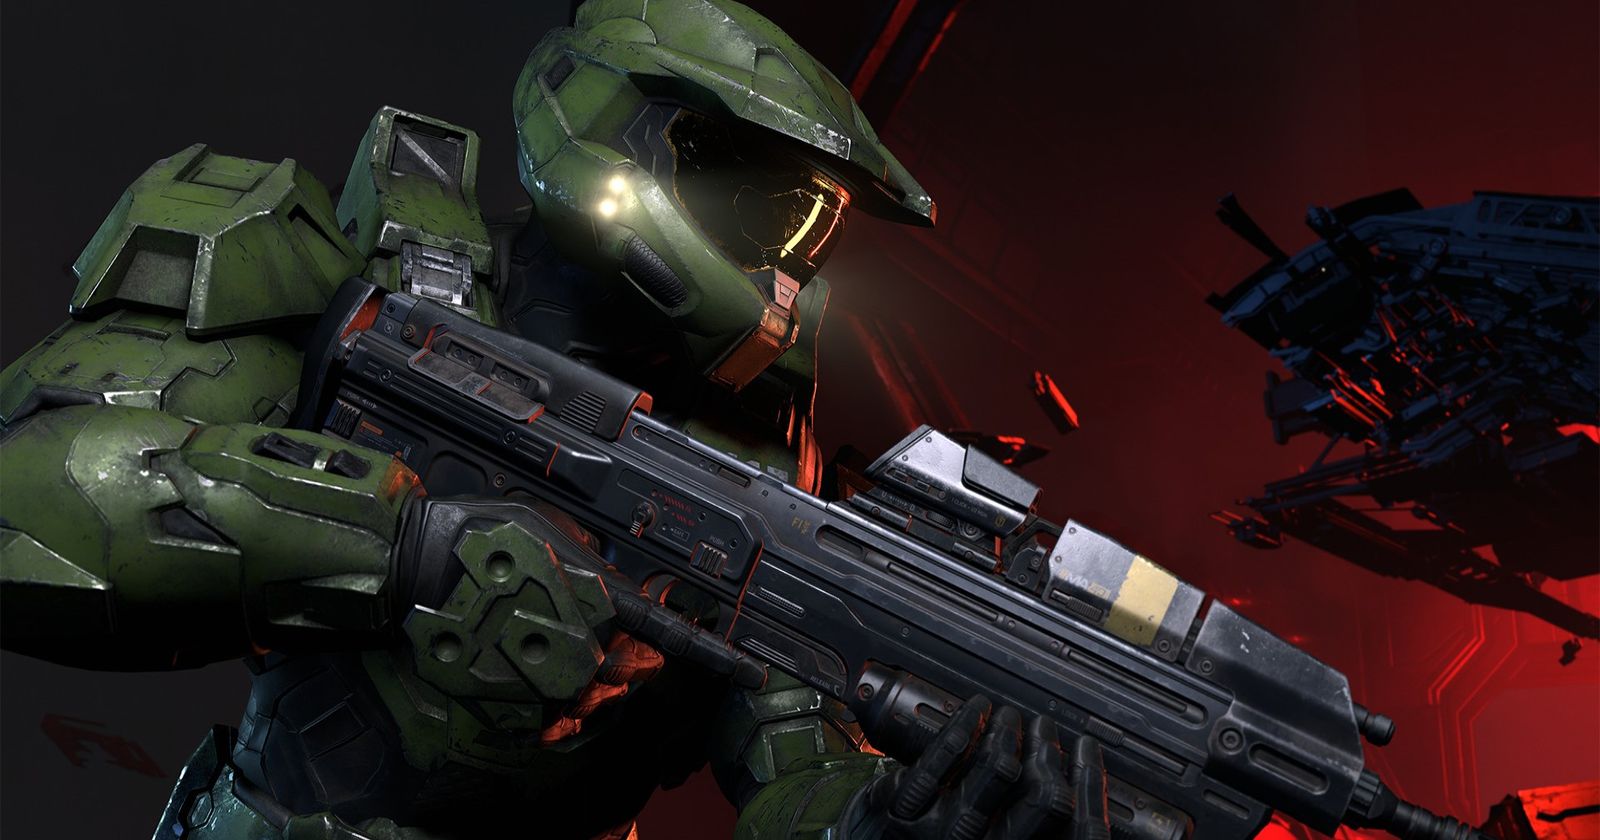 Here's how 'Halo 5: Guardians' multiplayer rankings work